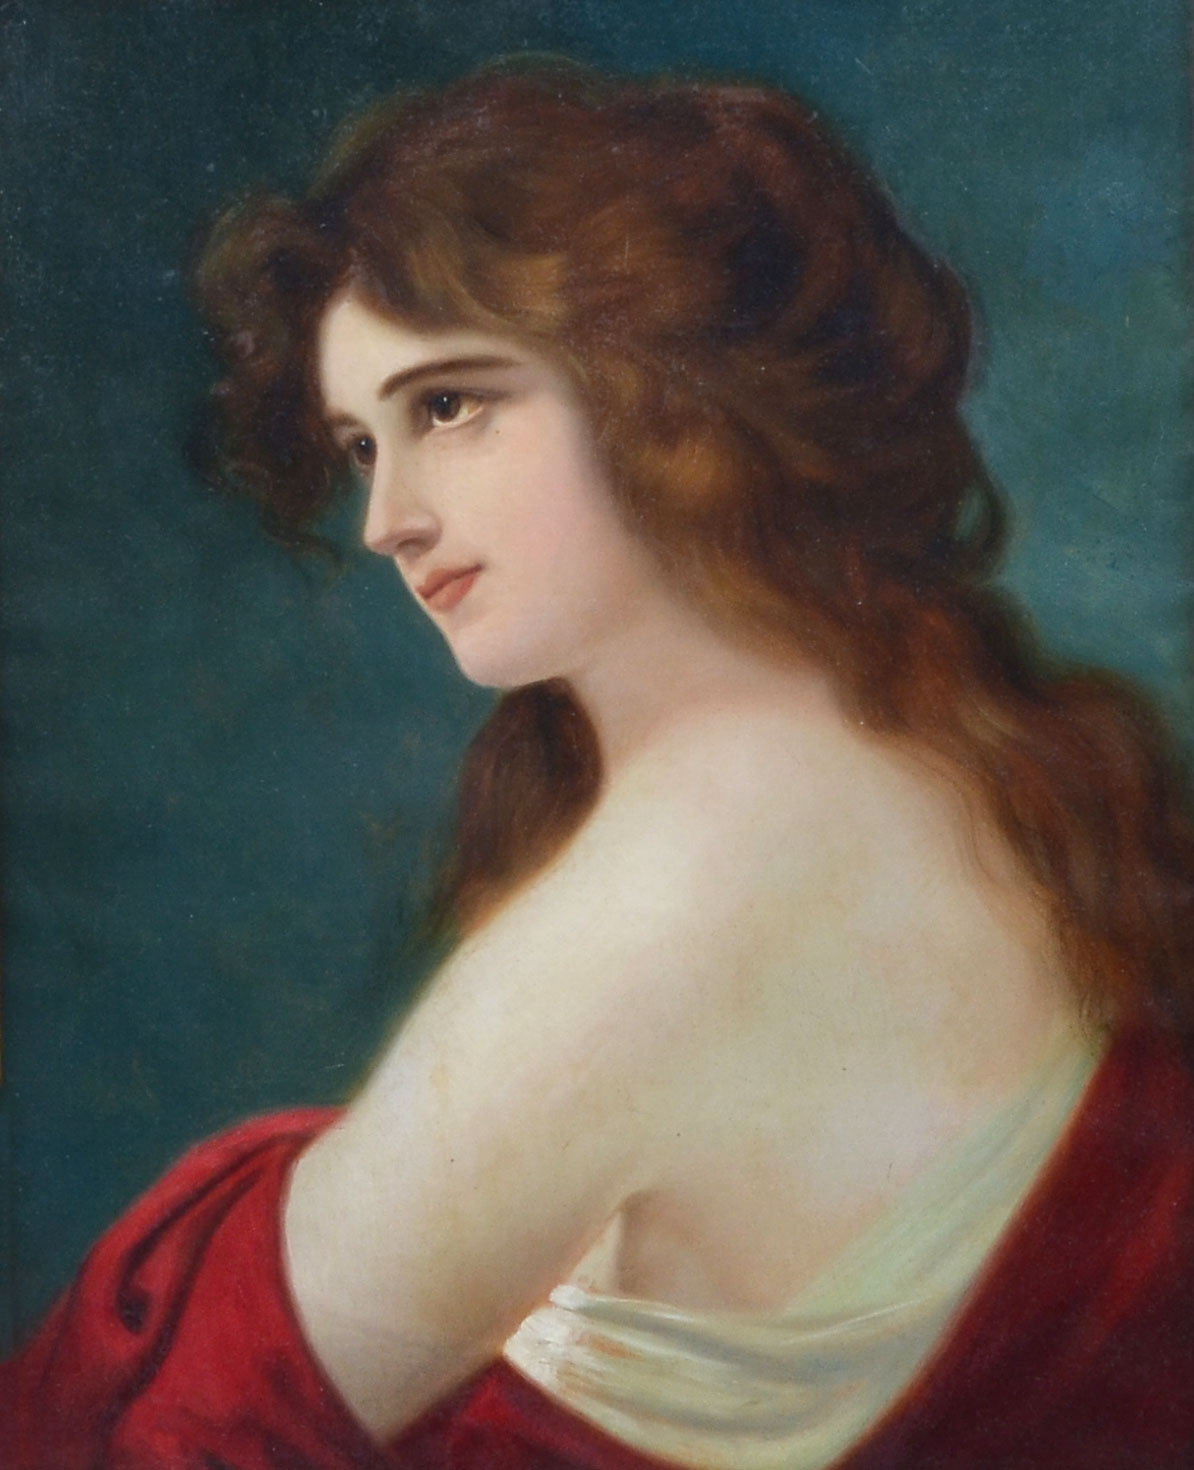 19TH CENTURY PAINTING OF A YOUNG